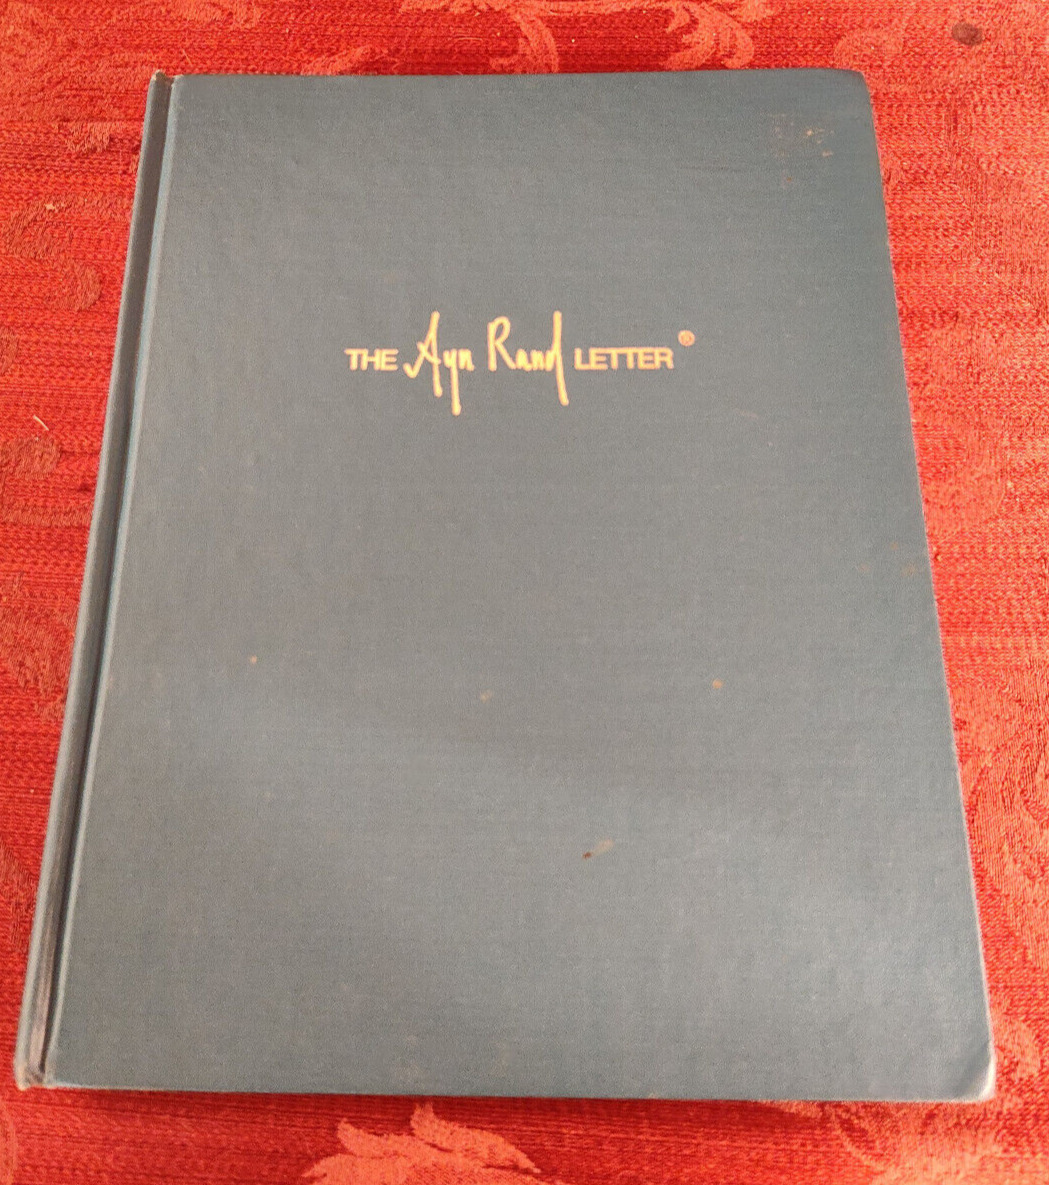 RARE AYN RAND LETTER complete Bound FIRST EDITION 1971-1975